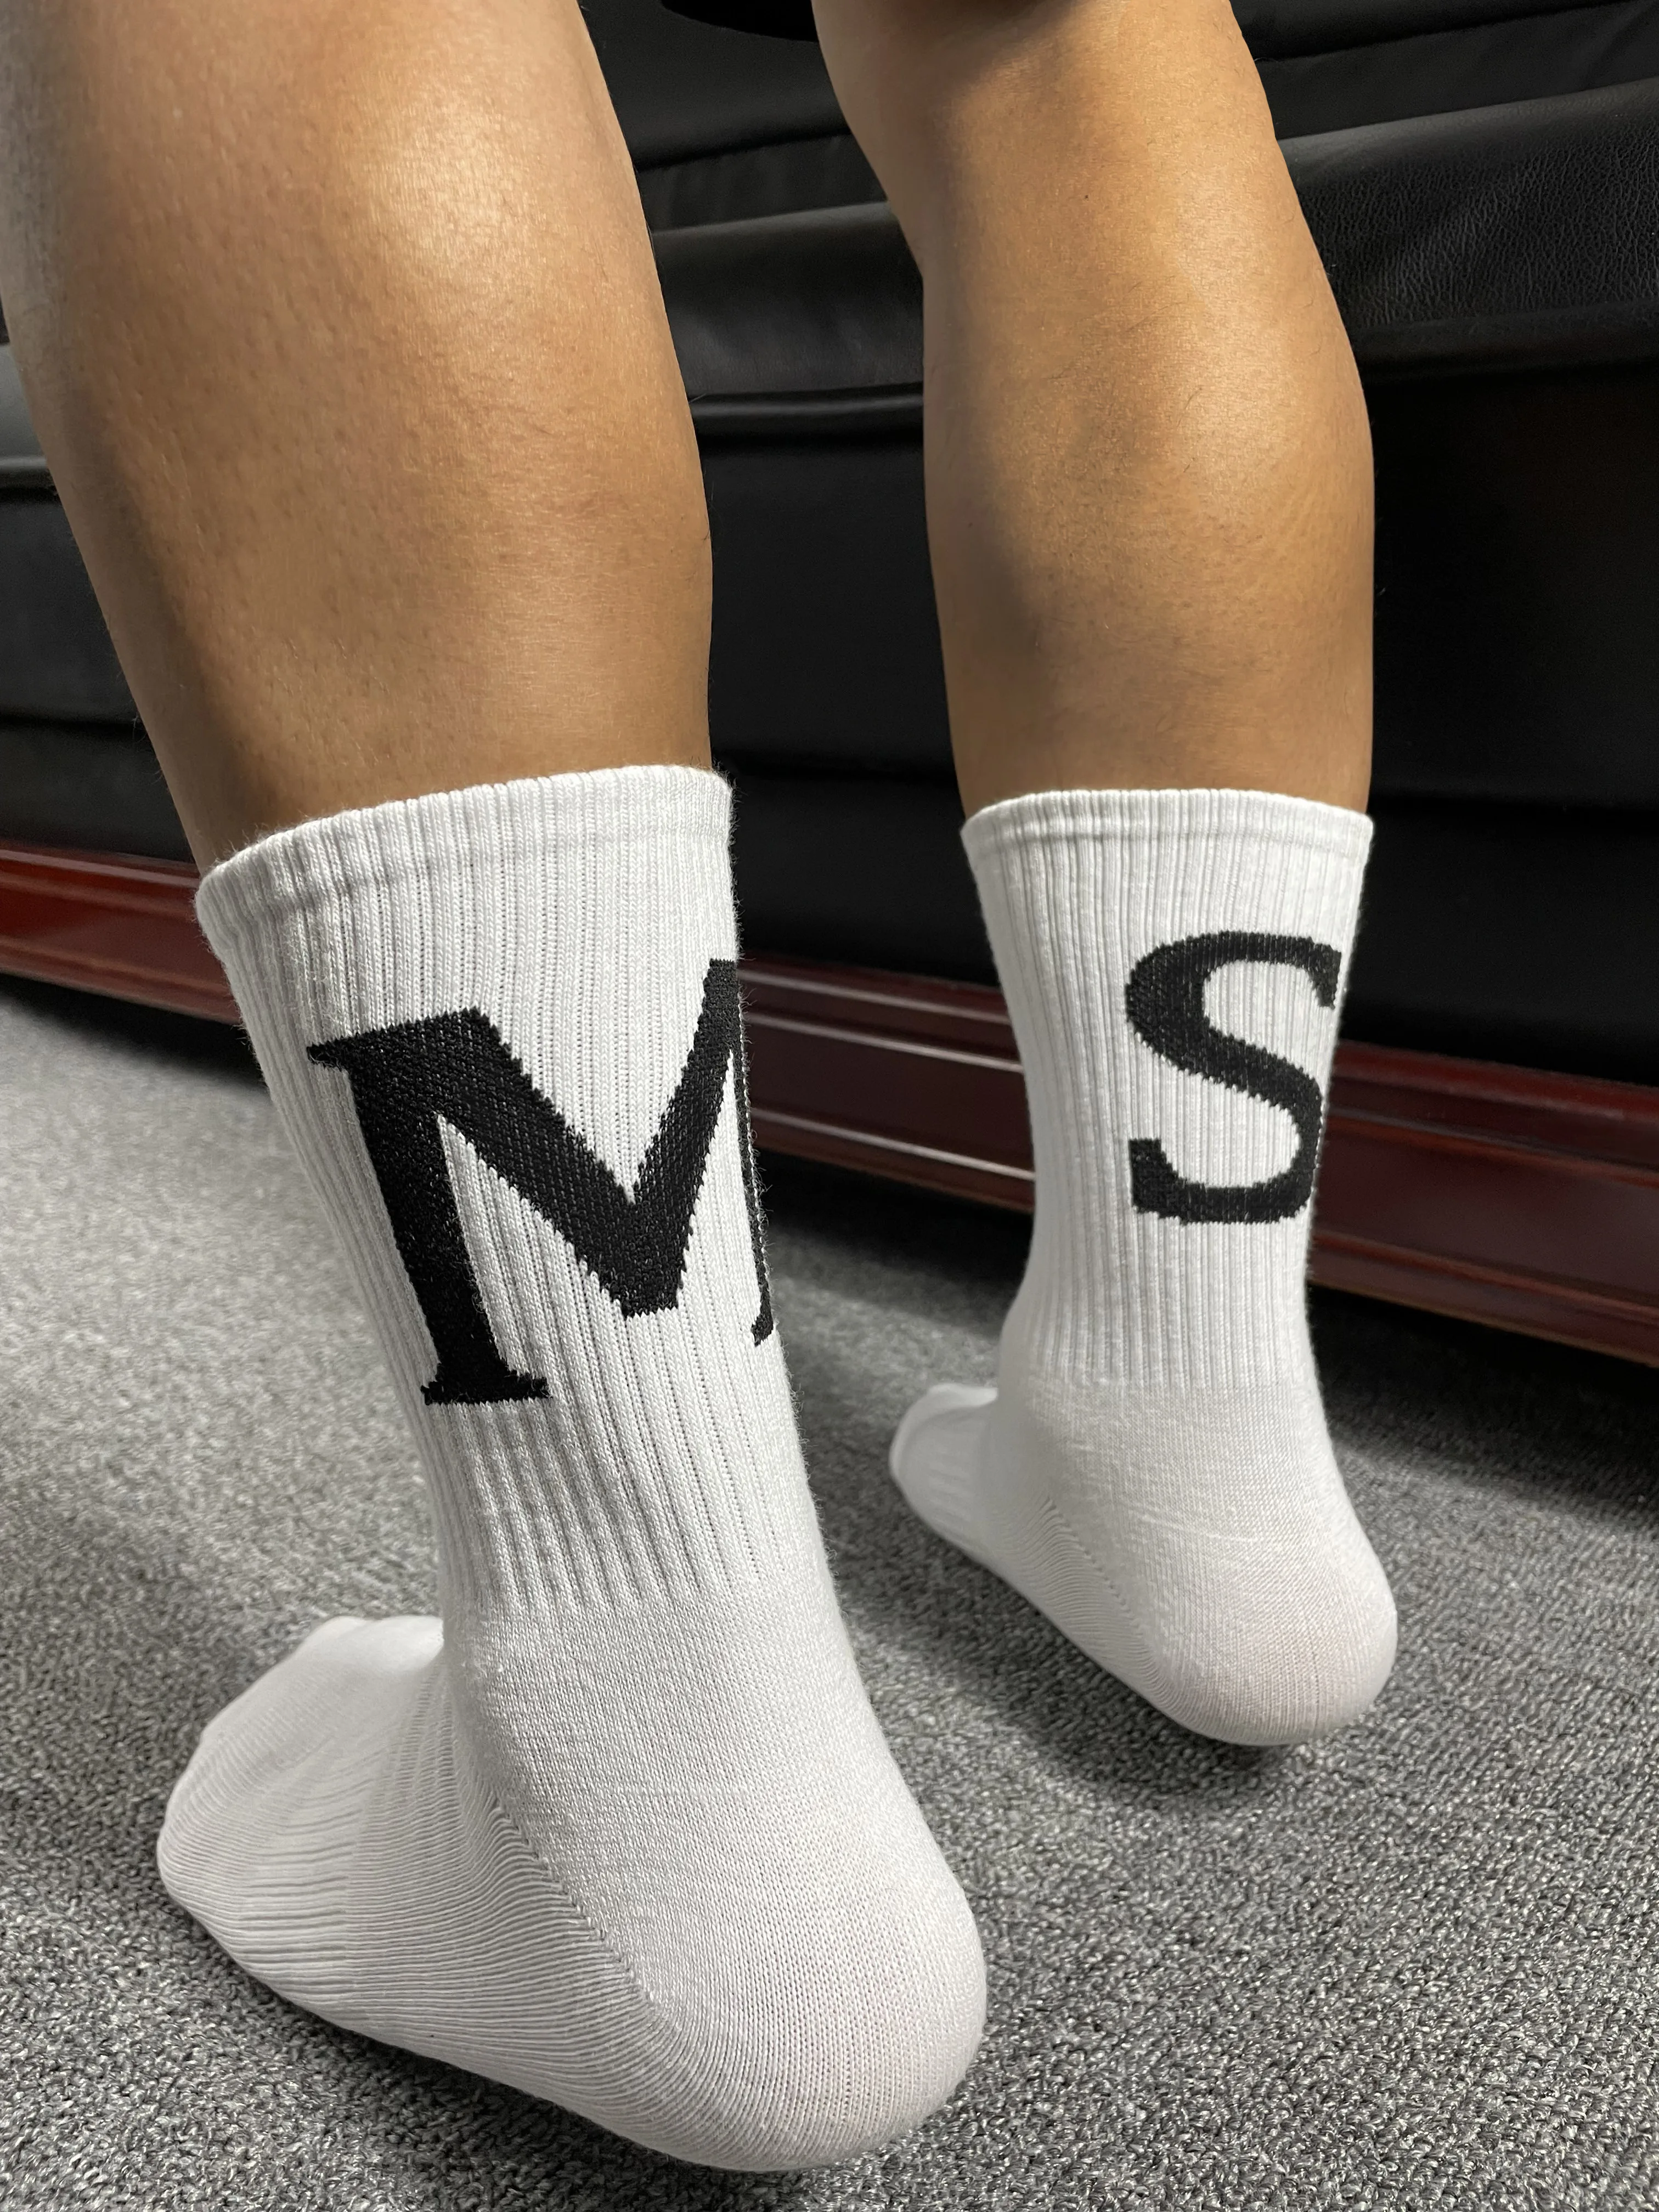 White Black 4pair/lot Striped Hiking Cycling Letter Sock Gay Sexy Men Sports Long Tube Streetwear Striped Socks Comfortable enlarge